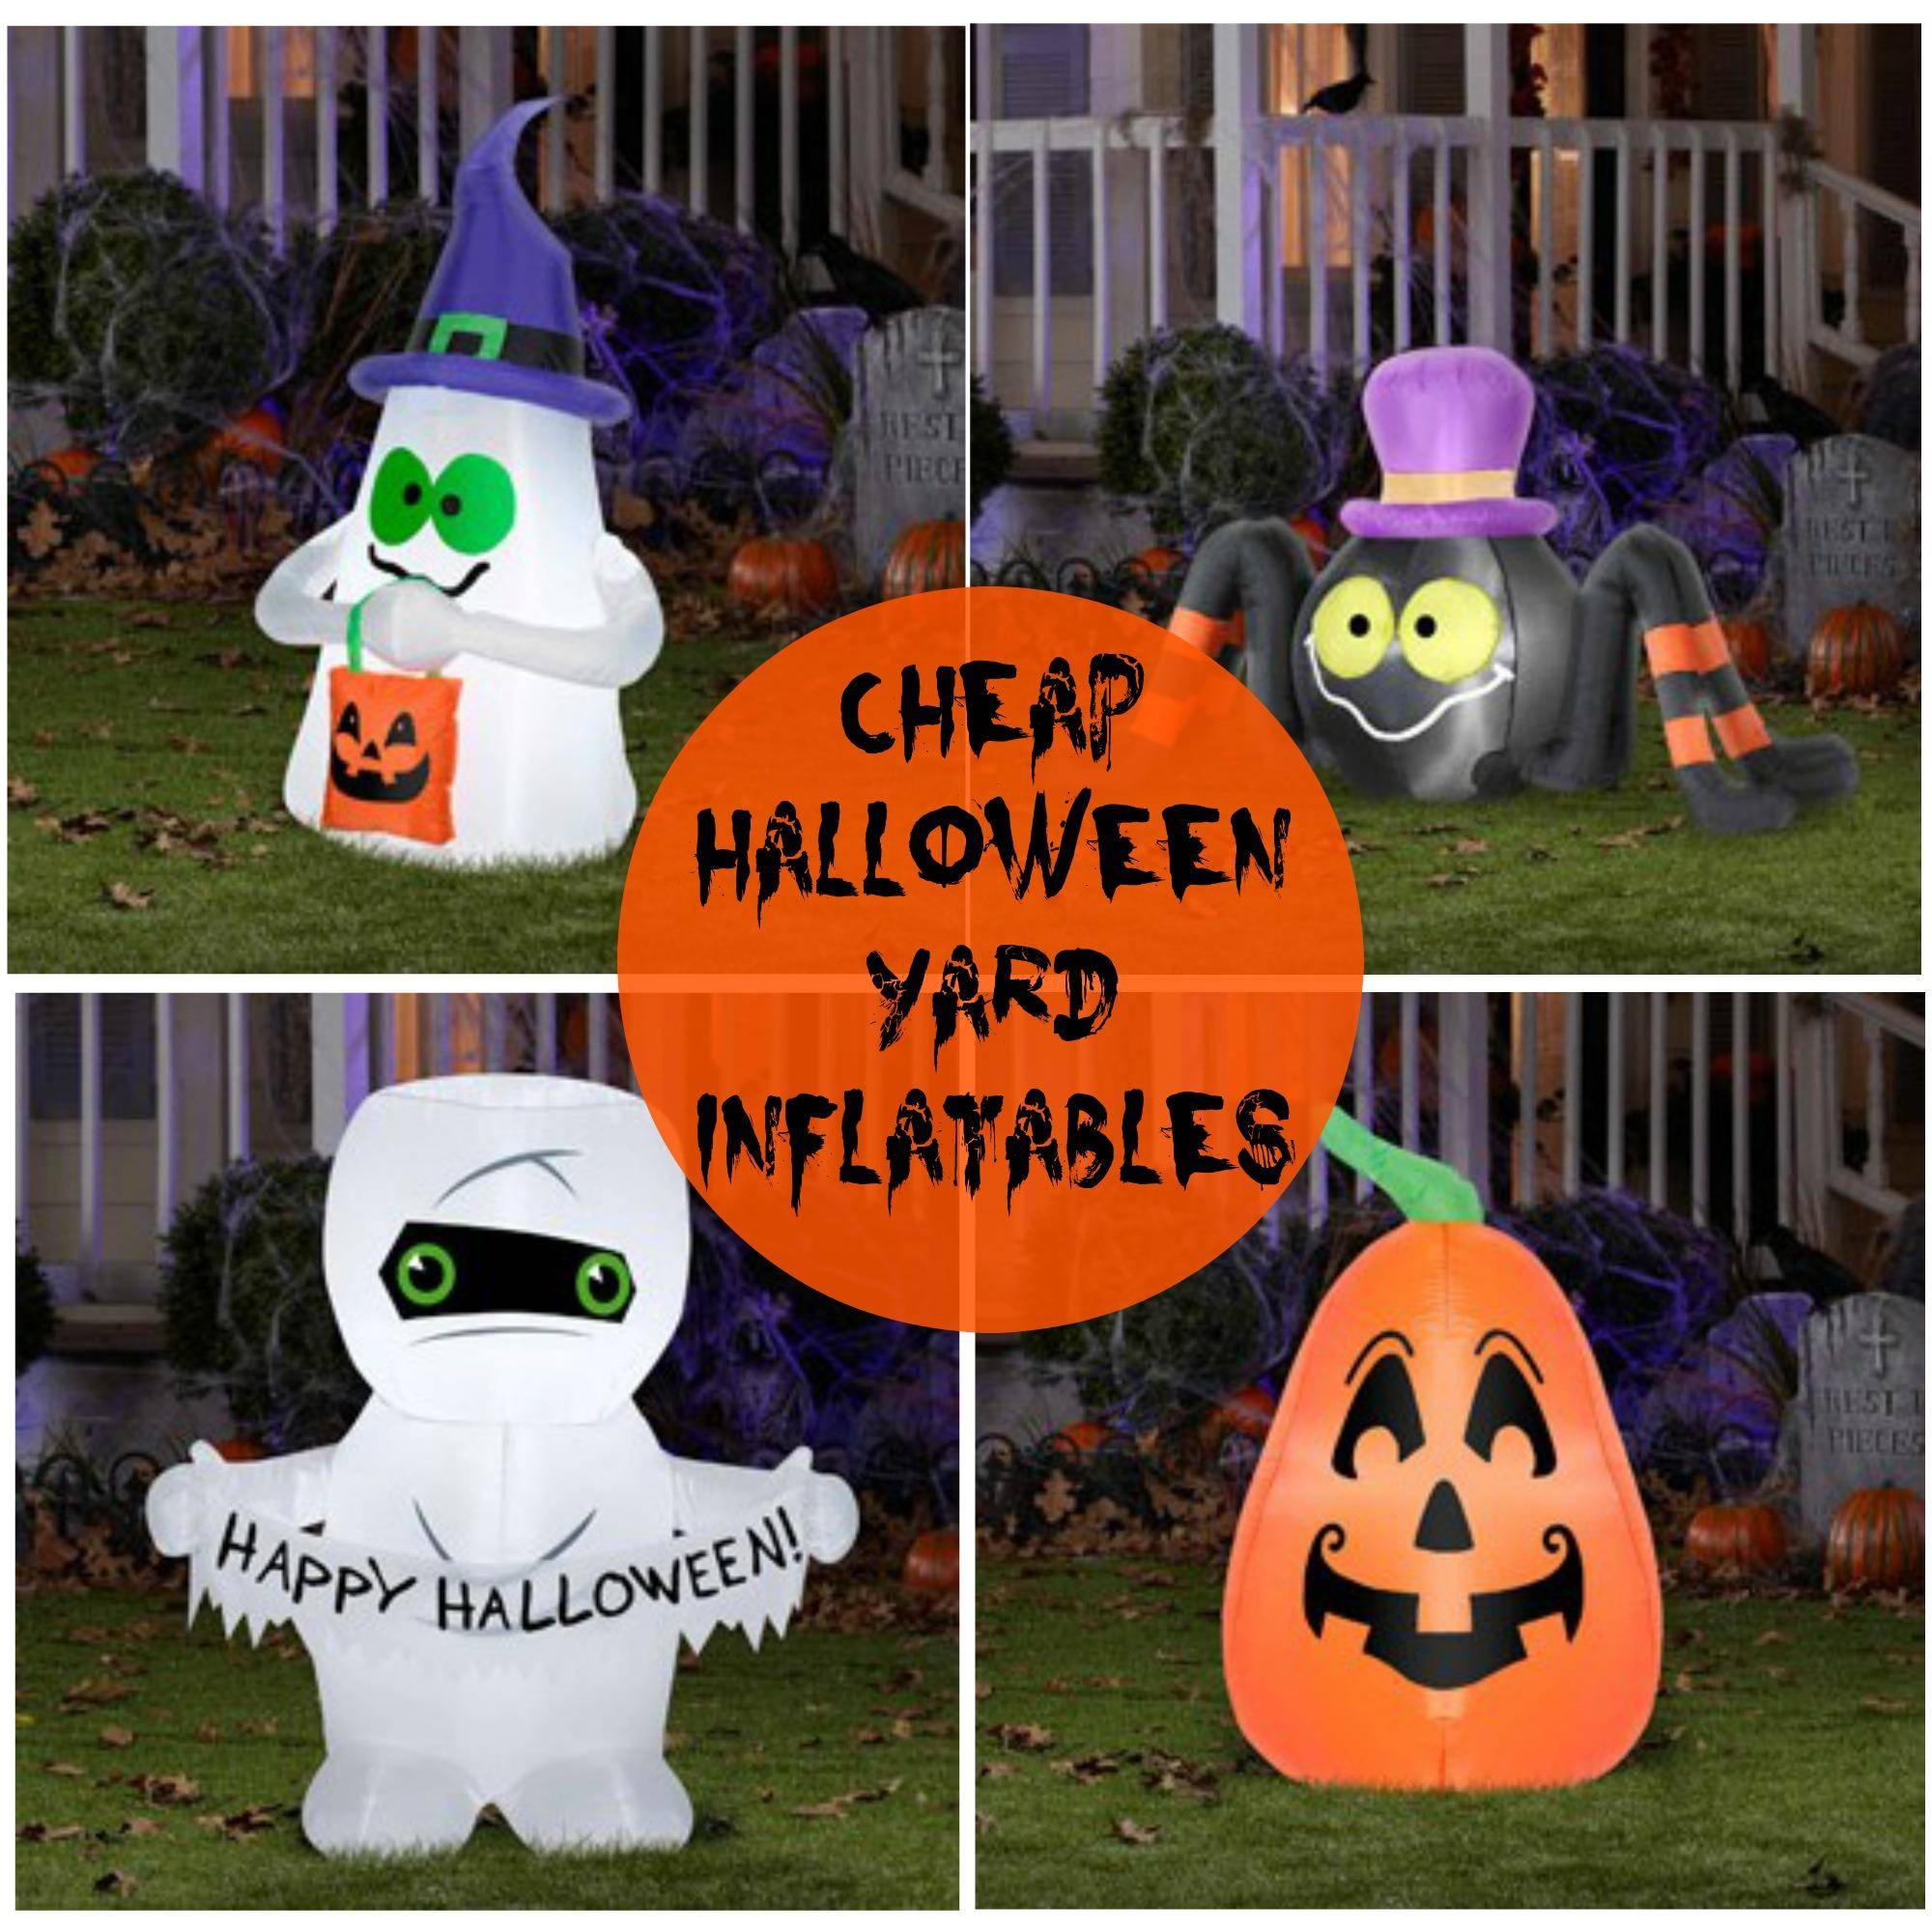 Cheap Halloween Yard Inflatables | As low as $14.97 + FREE Pick Up!